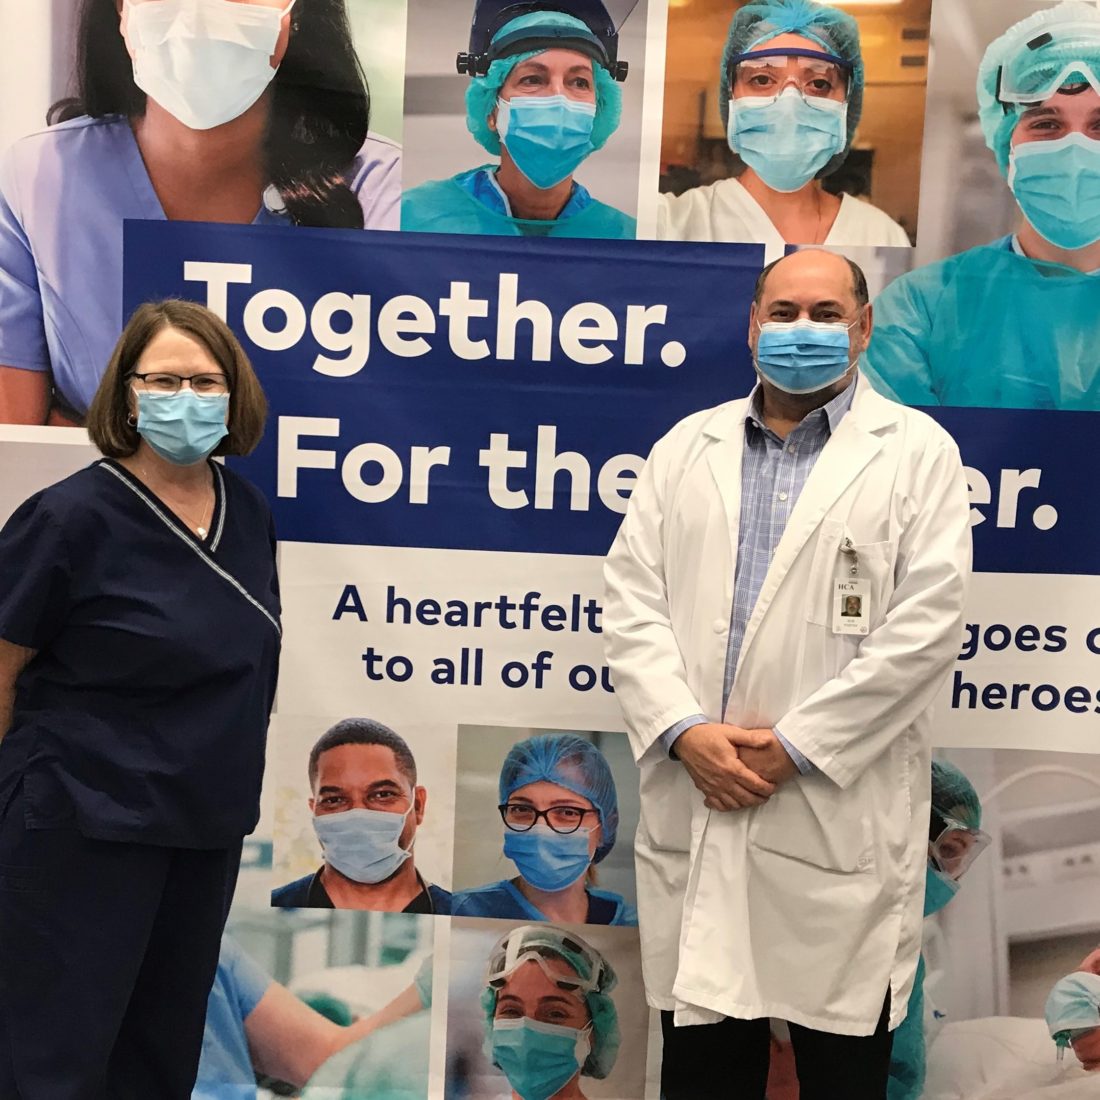 Man and woman wearing face masks posing in front of large backdrop with images of healthcare workers. 